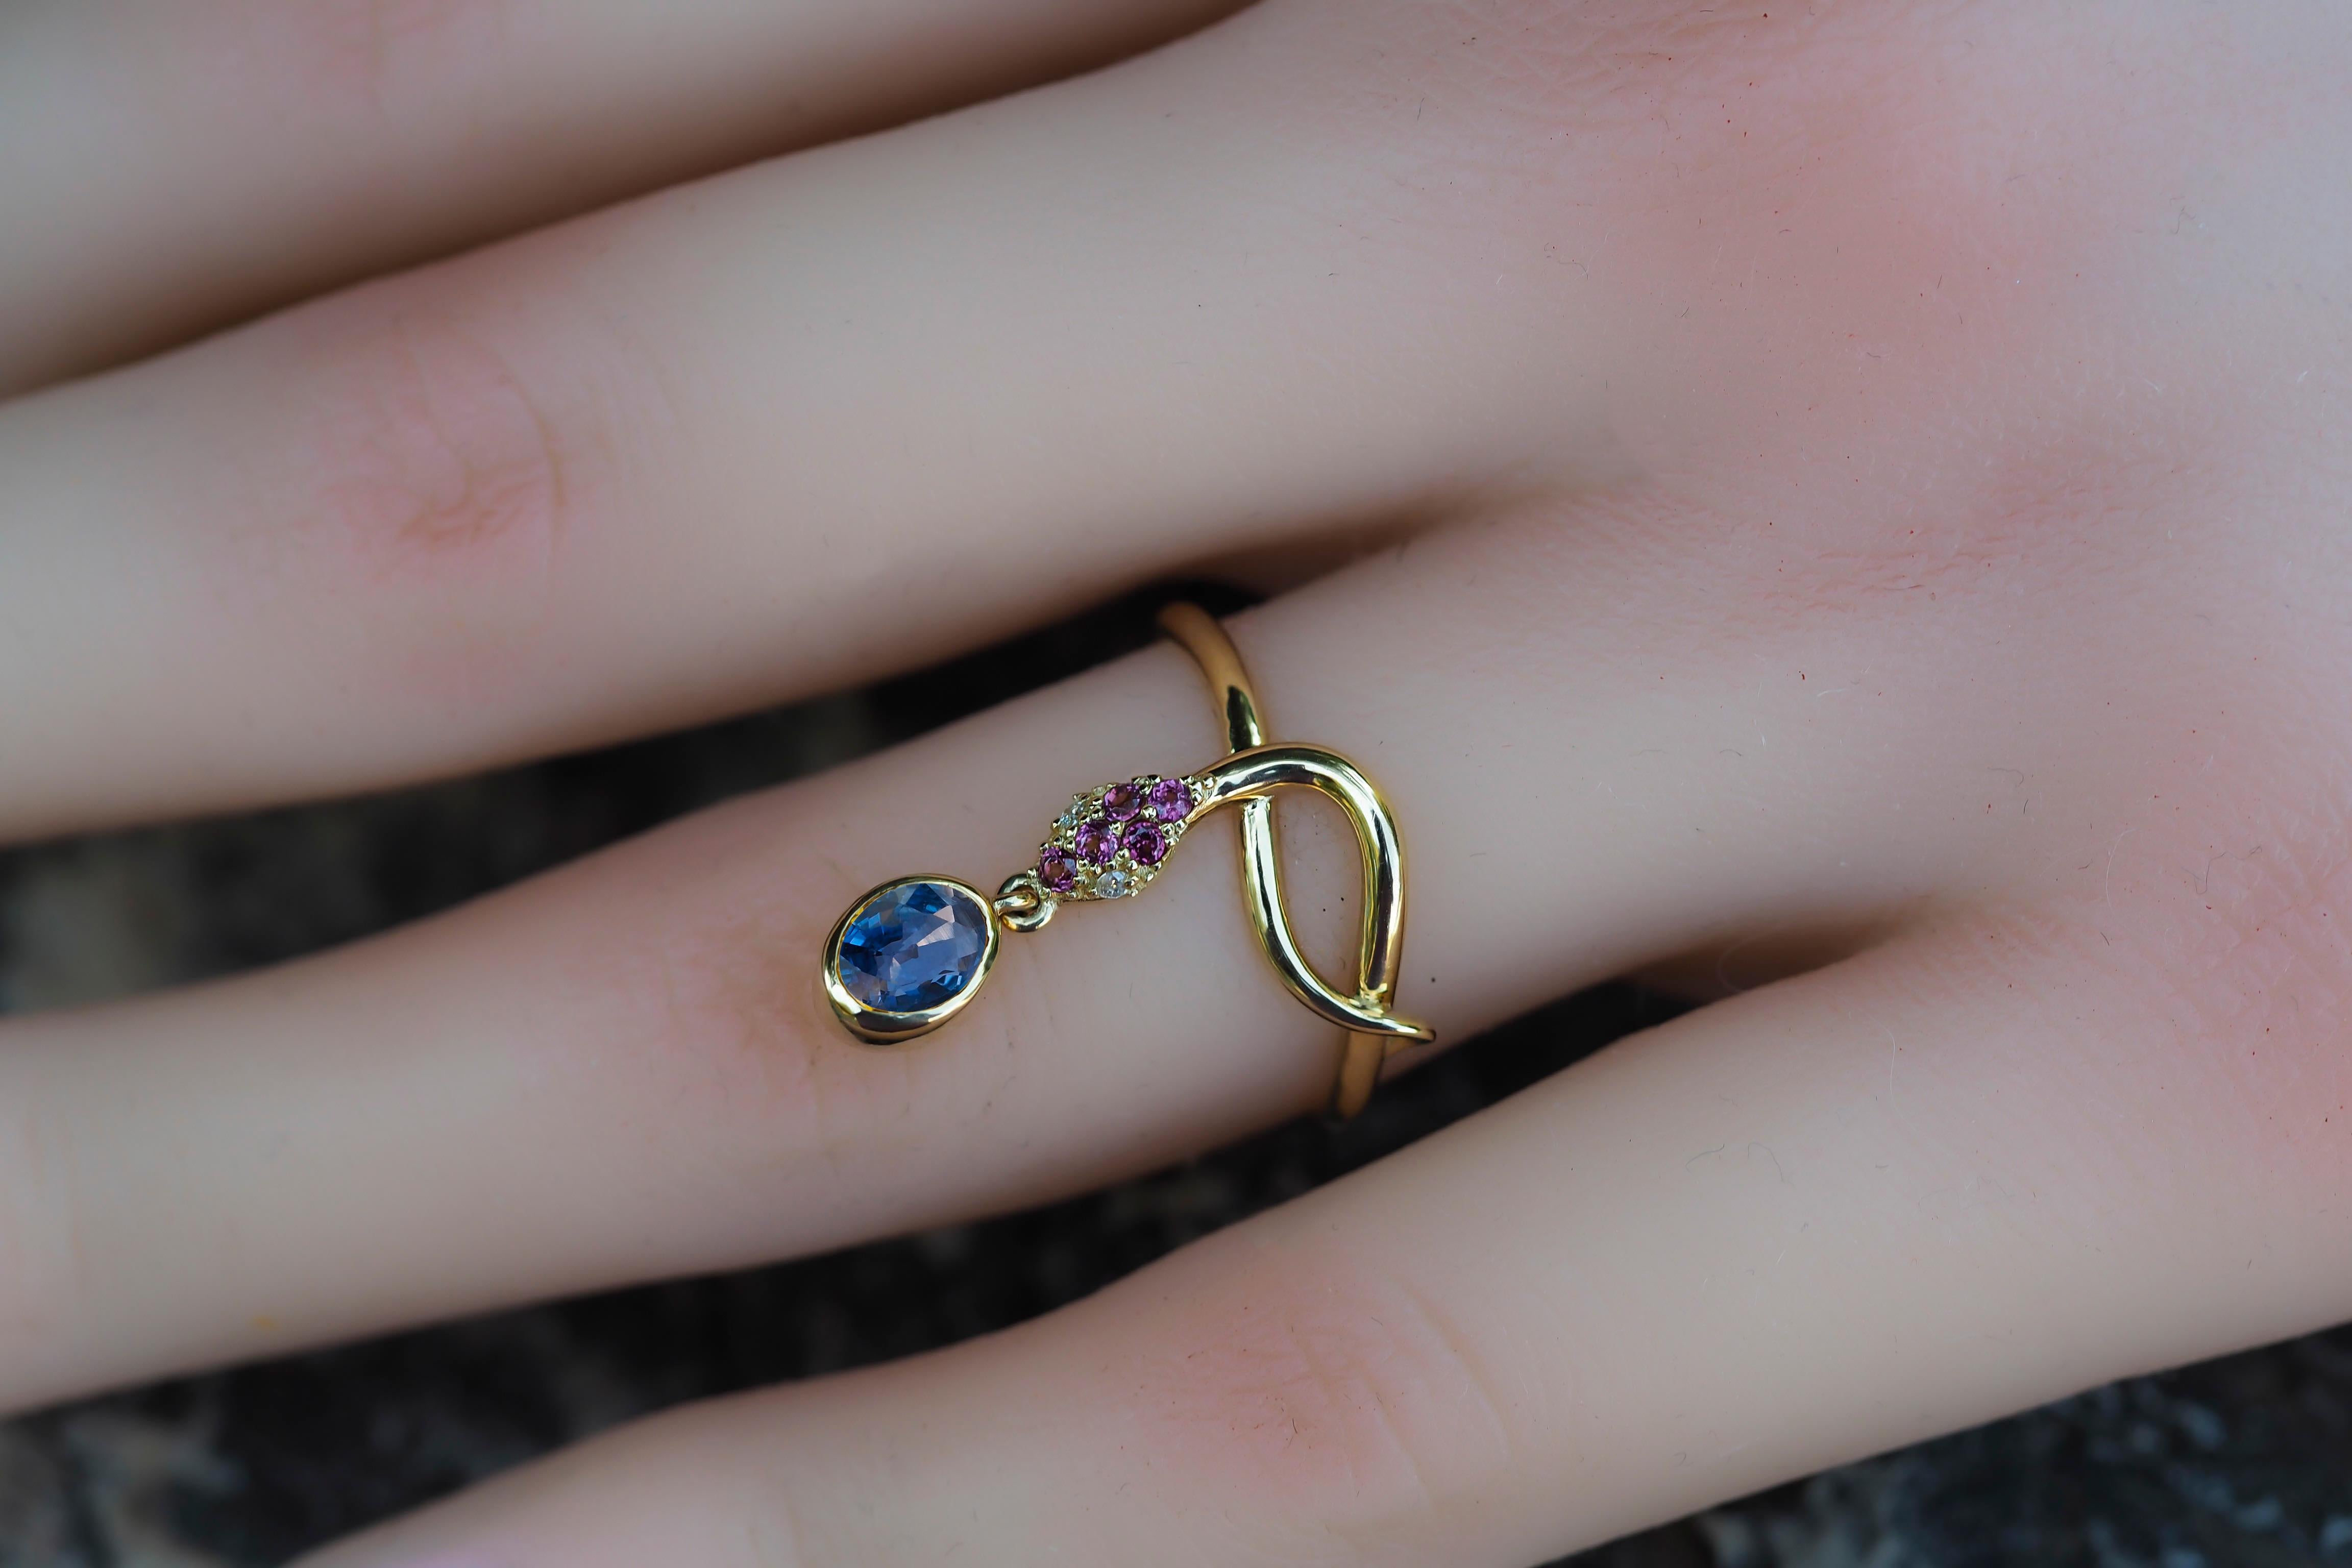 Snake ring with sapphire. 
Blue sapphire gold ring. Snake gold ring. Genuine sapphire ring. Oval sapphire ring. September birthstone ring.

Metal: 14k gold.
Weight: 2.25 g. depends from size.

Gemstones:
Sapphire: color - blue
Oval cut, 0.78 ct.